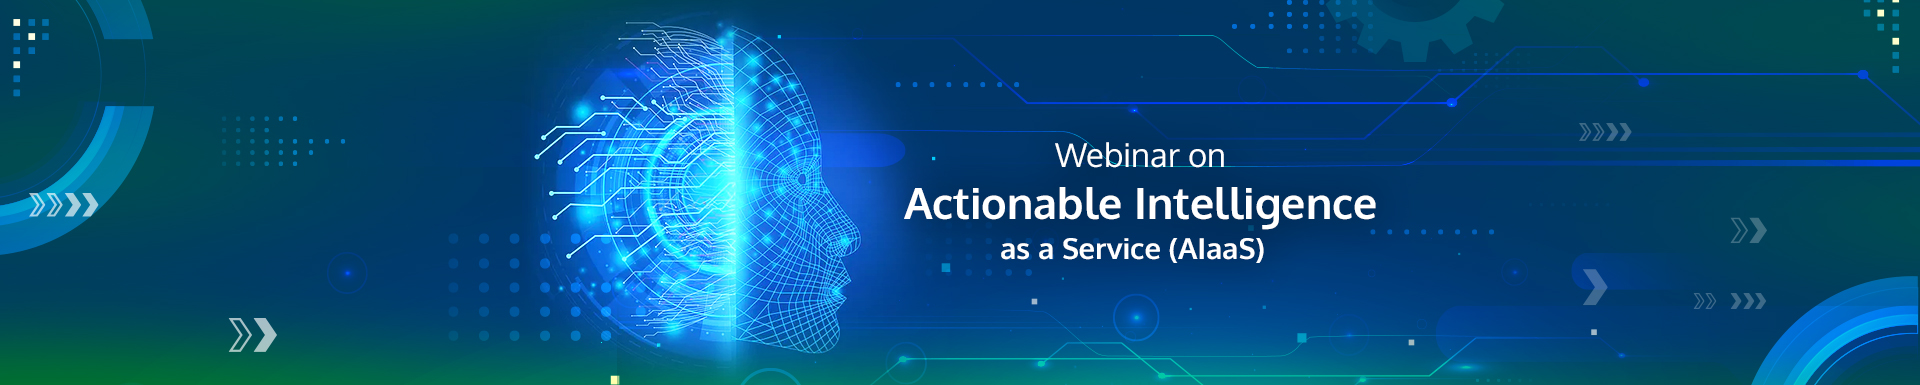 Actionable intelligence as a service